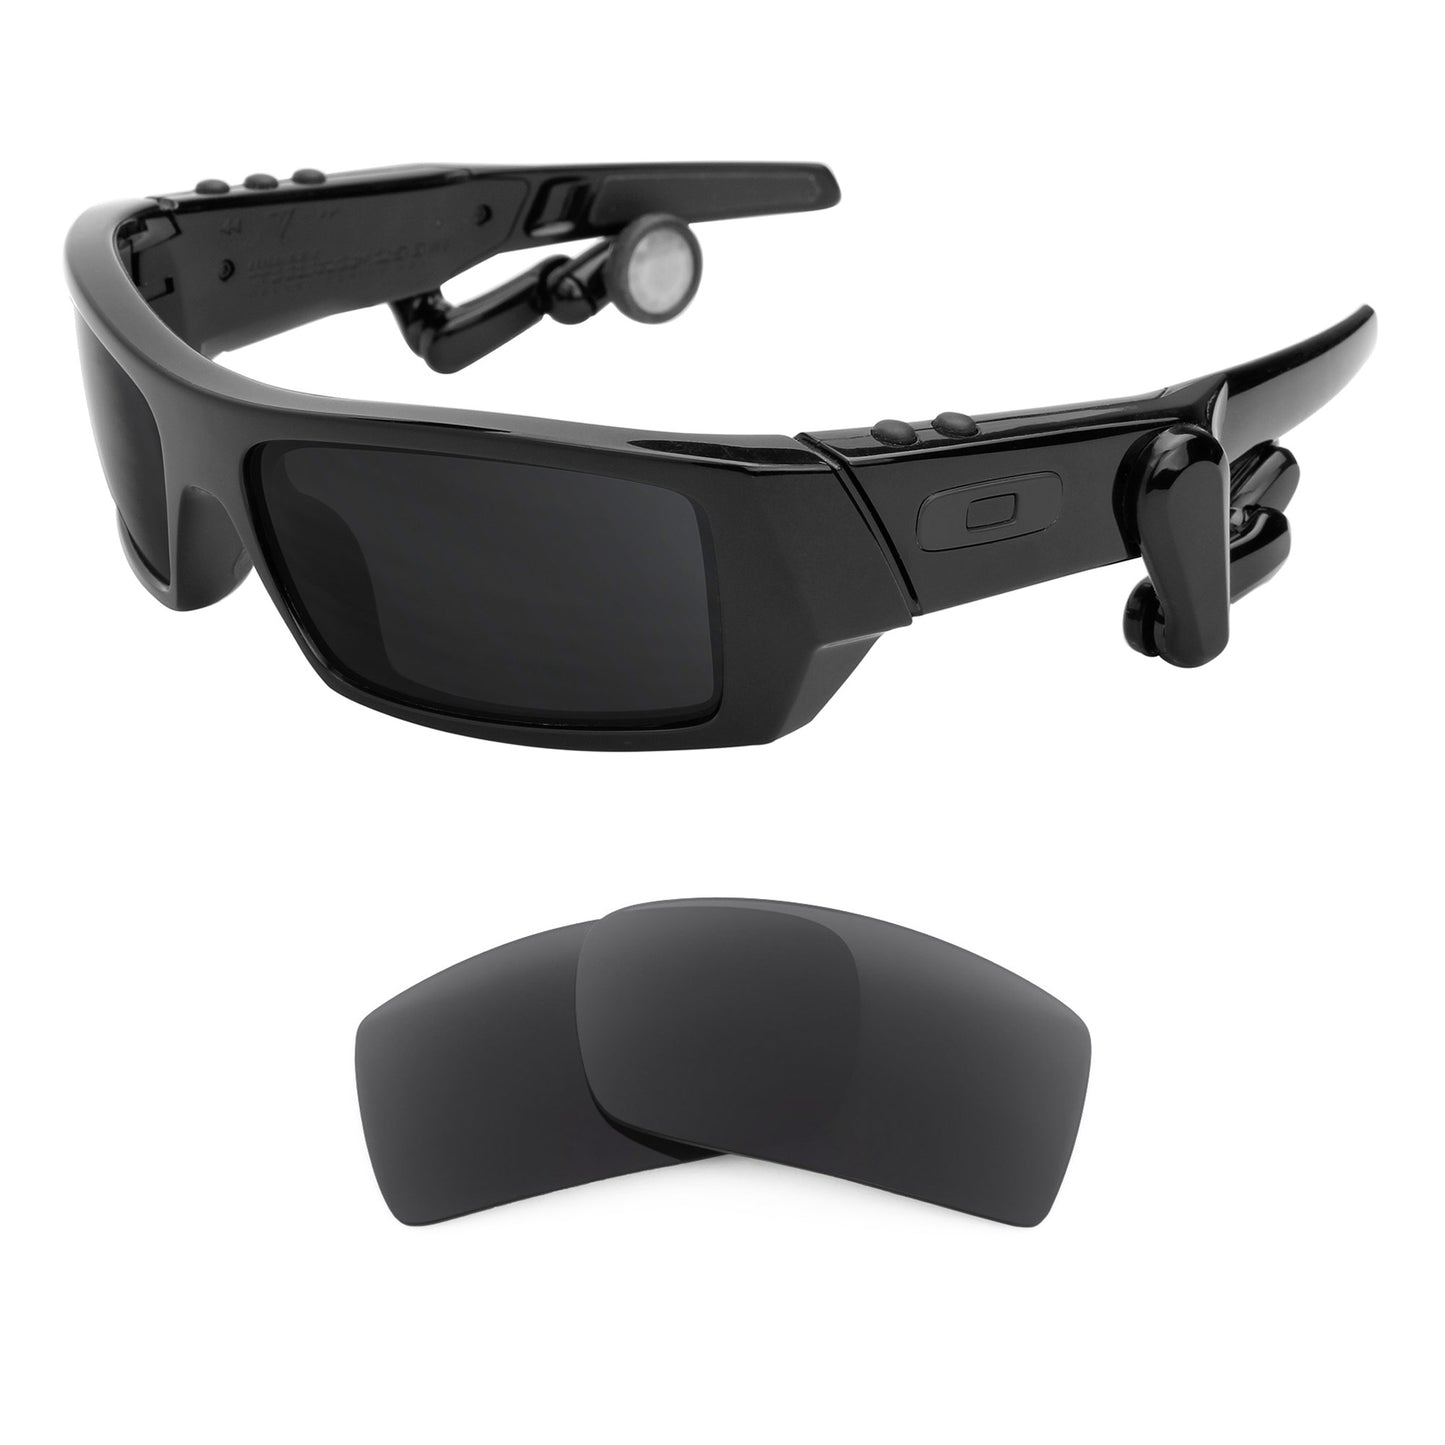 Oakley Thump 2 sunglasses with replacement lenses